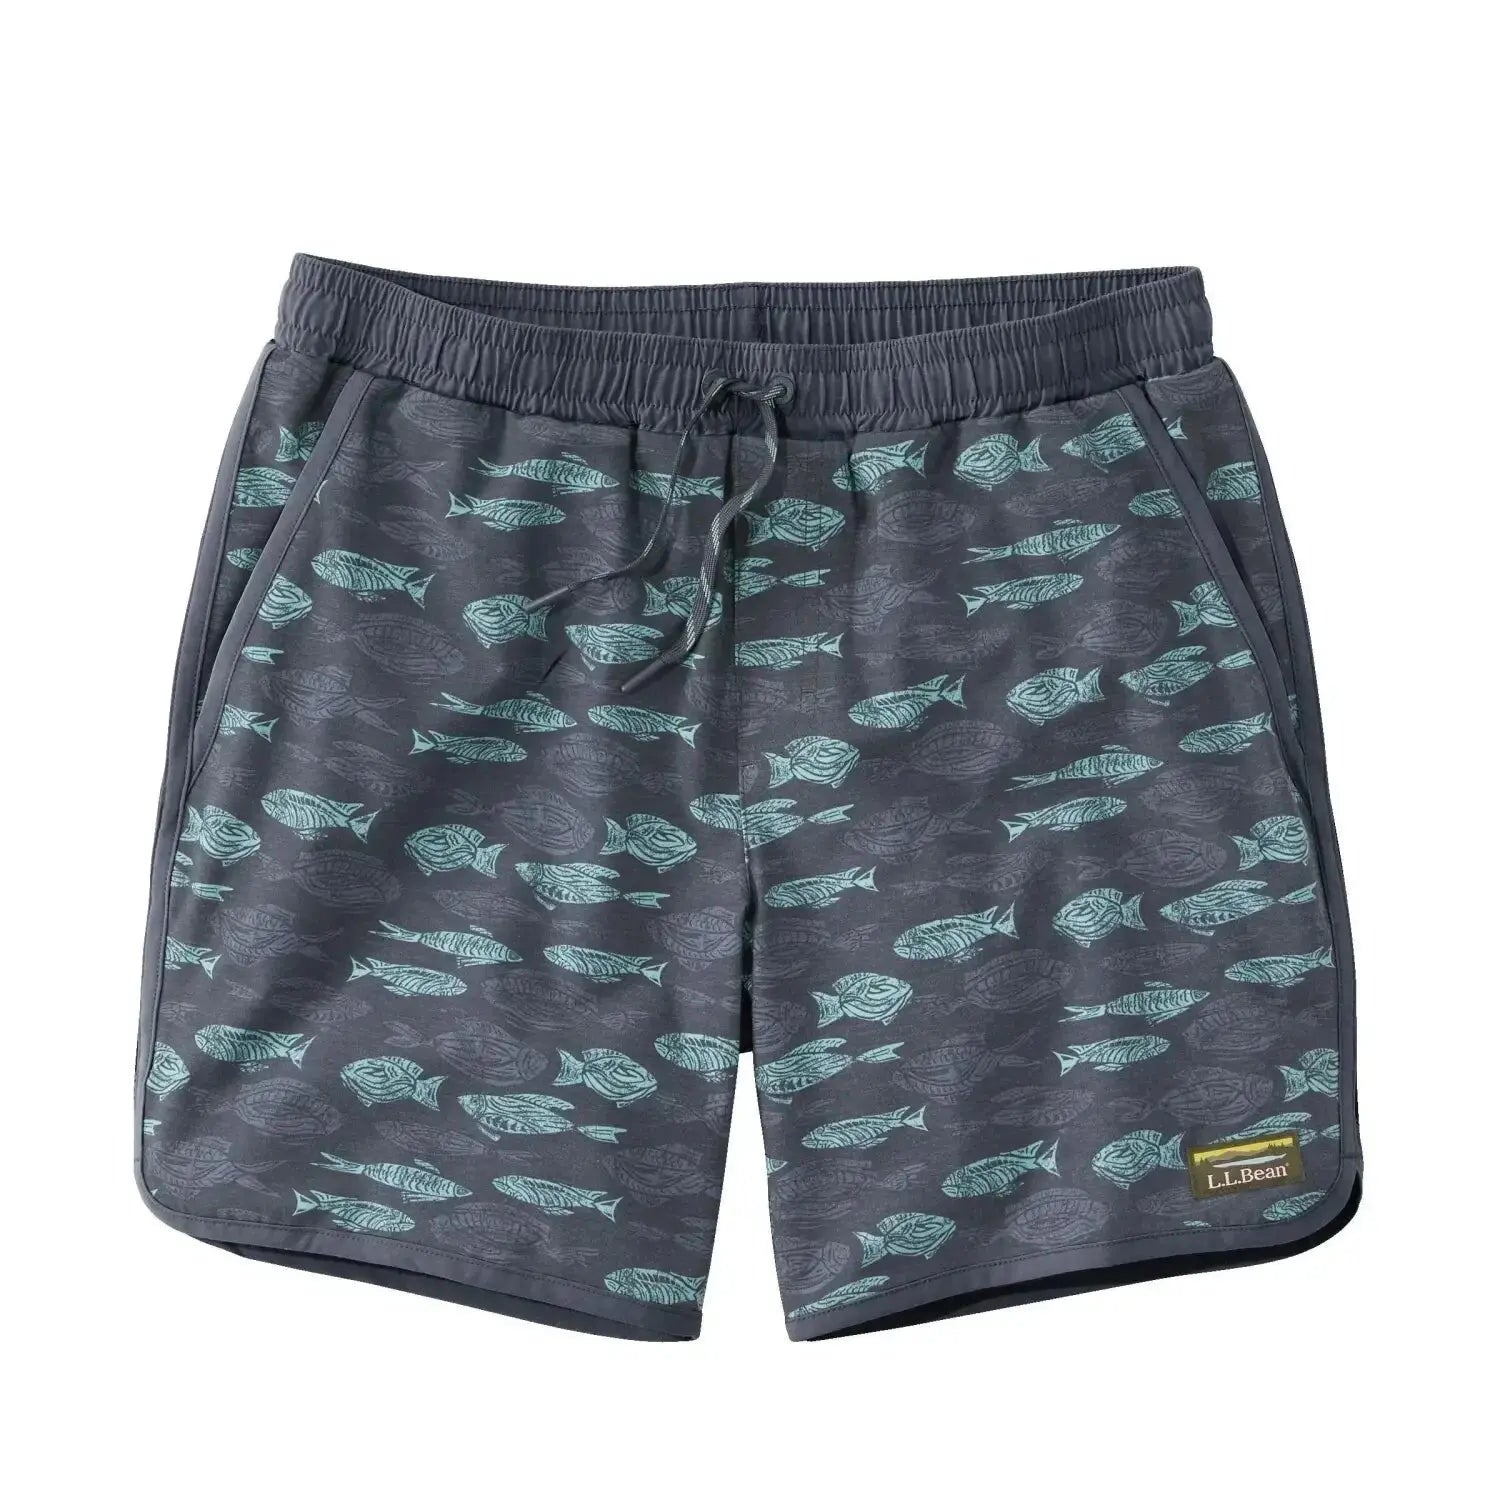 LL Bean Men's All-Adventure Swim Shorts shown in the Carbon Navy Fish Print. Front view.